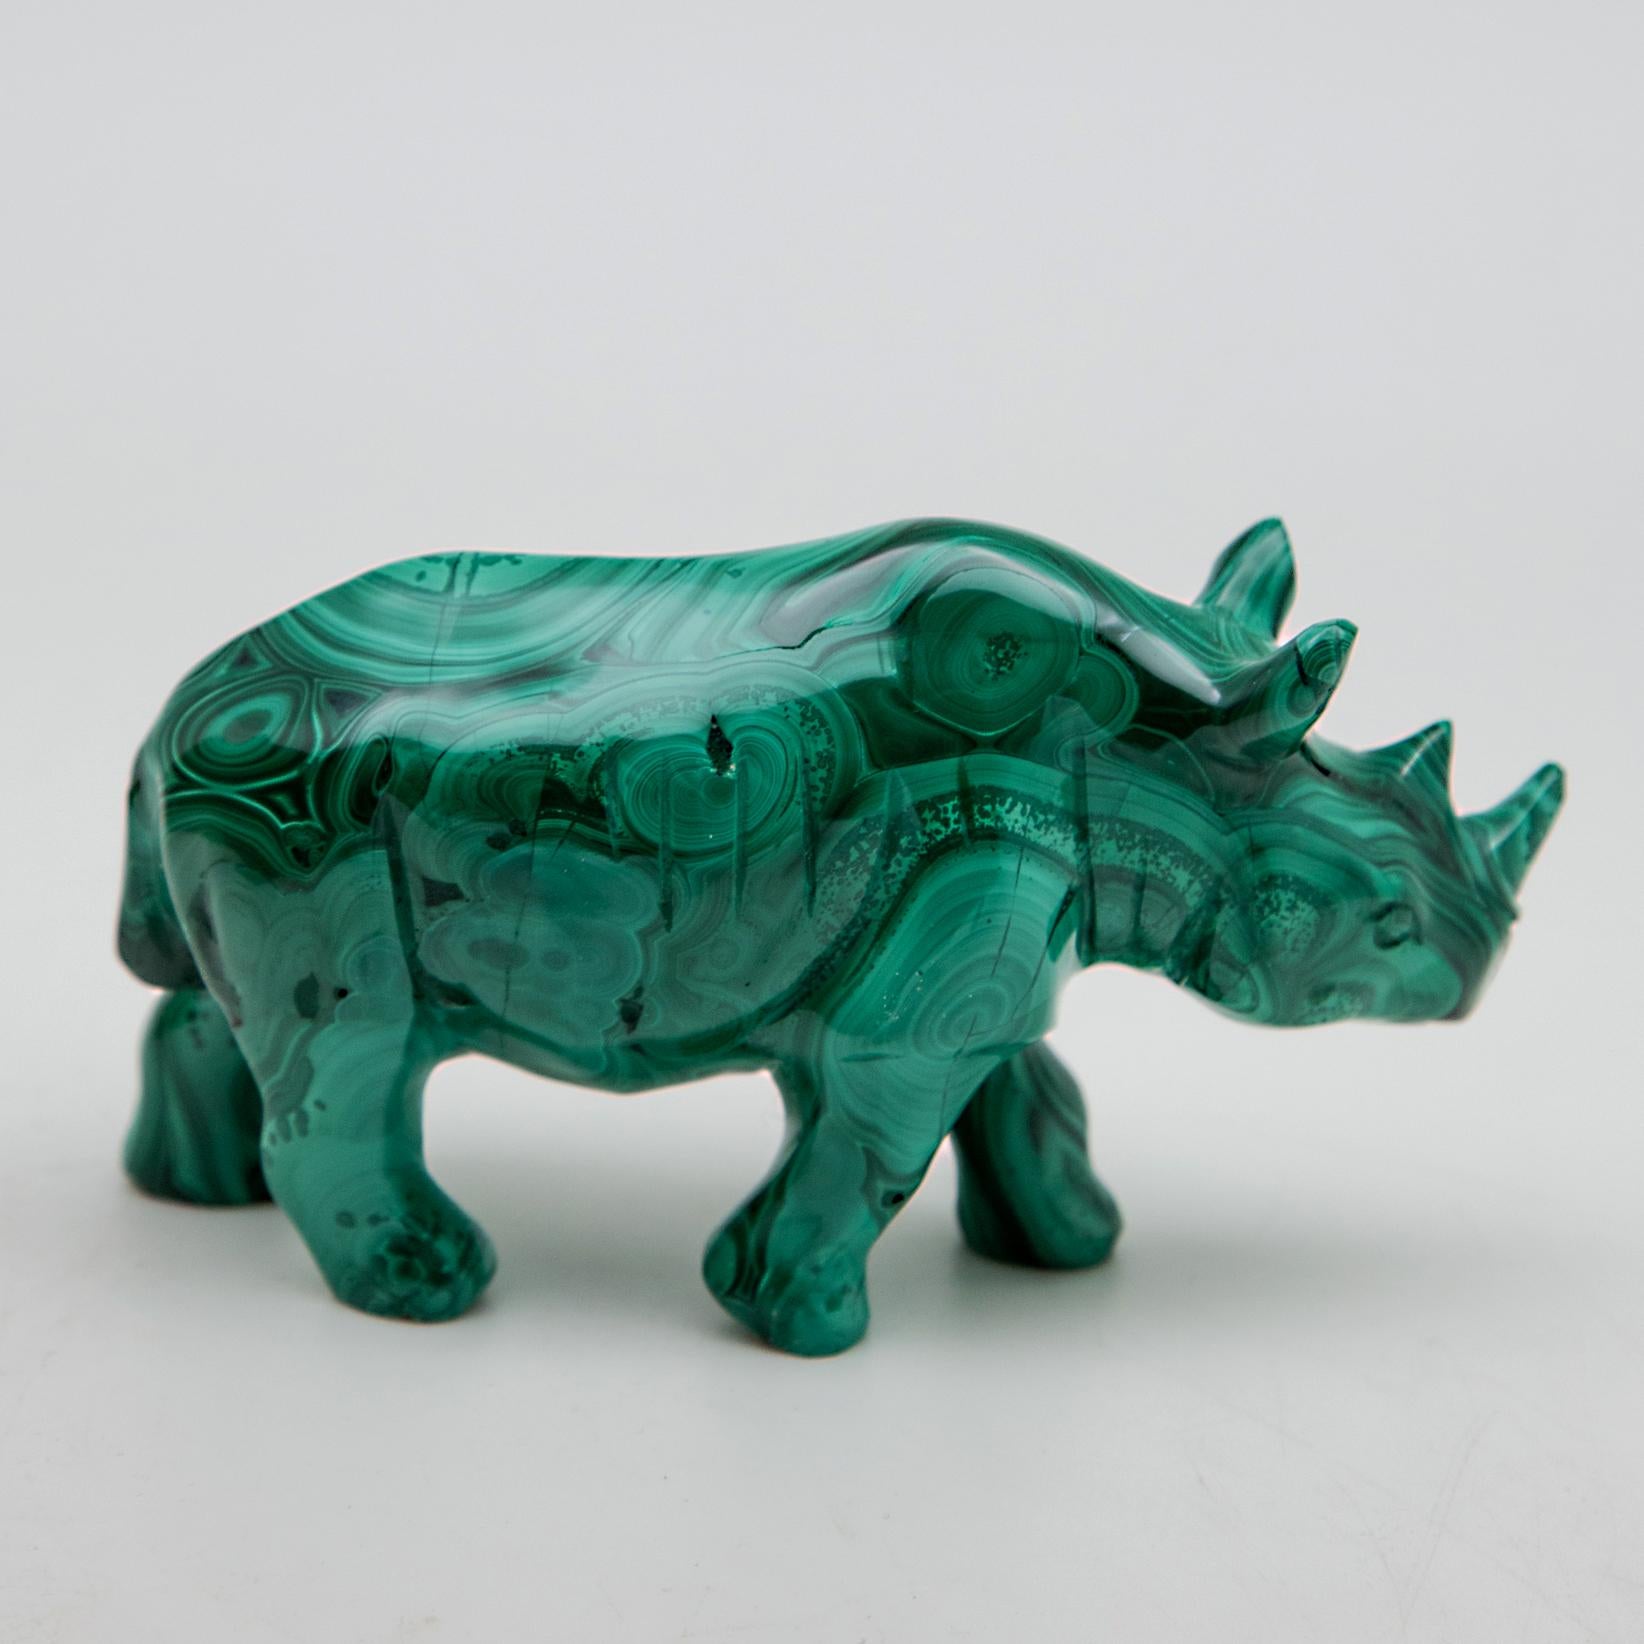 Large carved Malachite rhino. This piece was hand carved in India out of one solid piece of malachite from the Congo. Malachite, known as the 